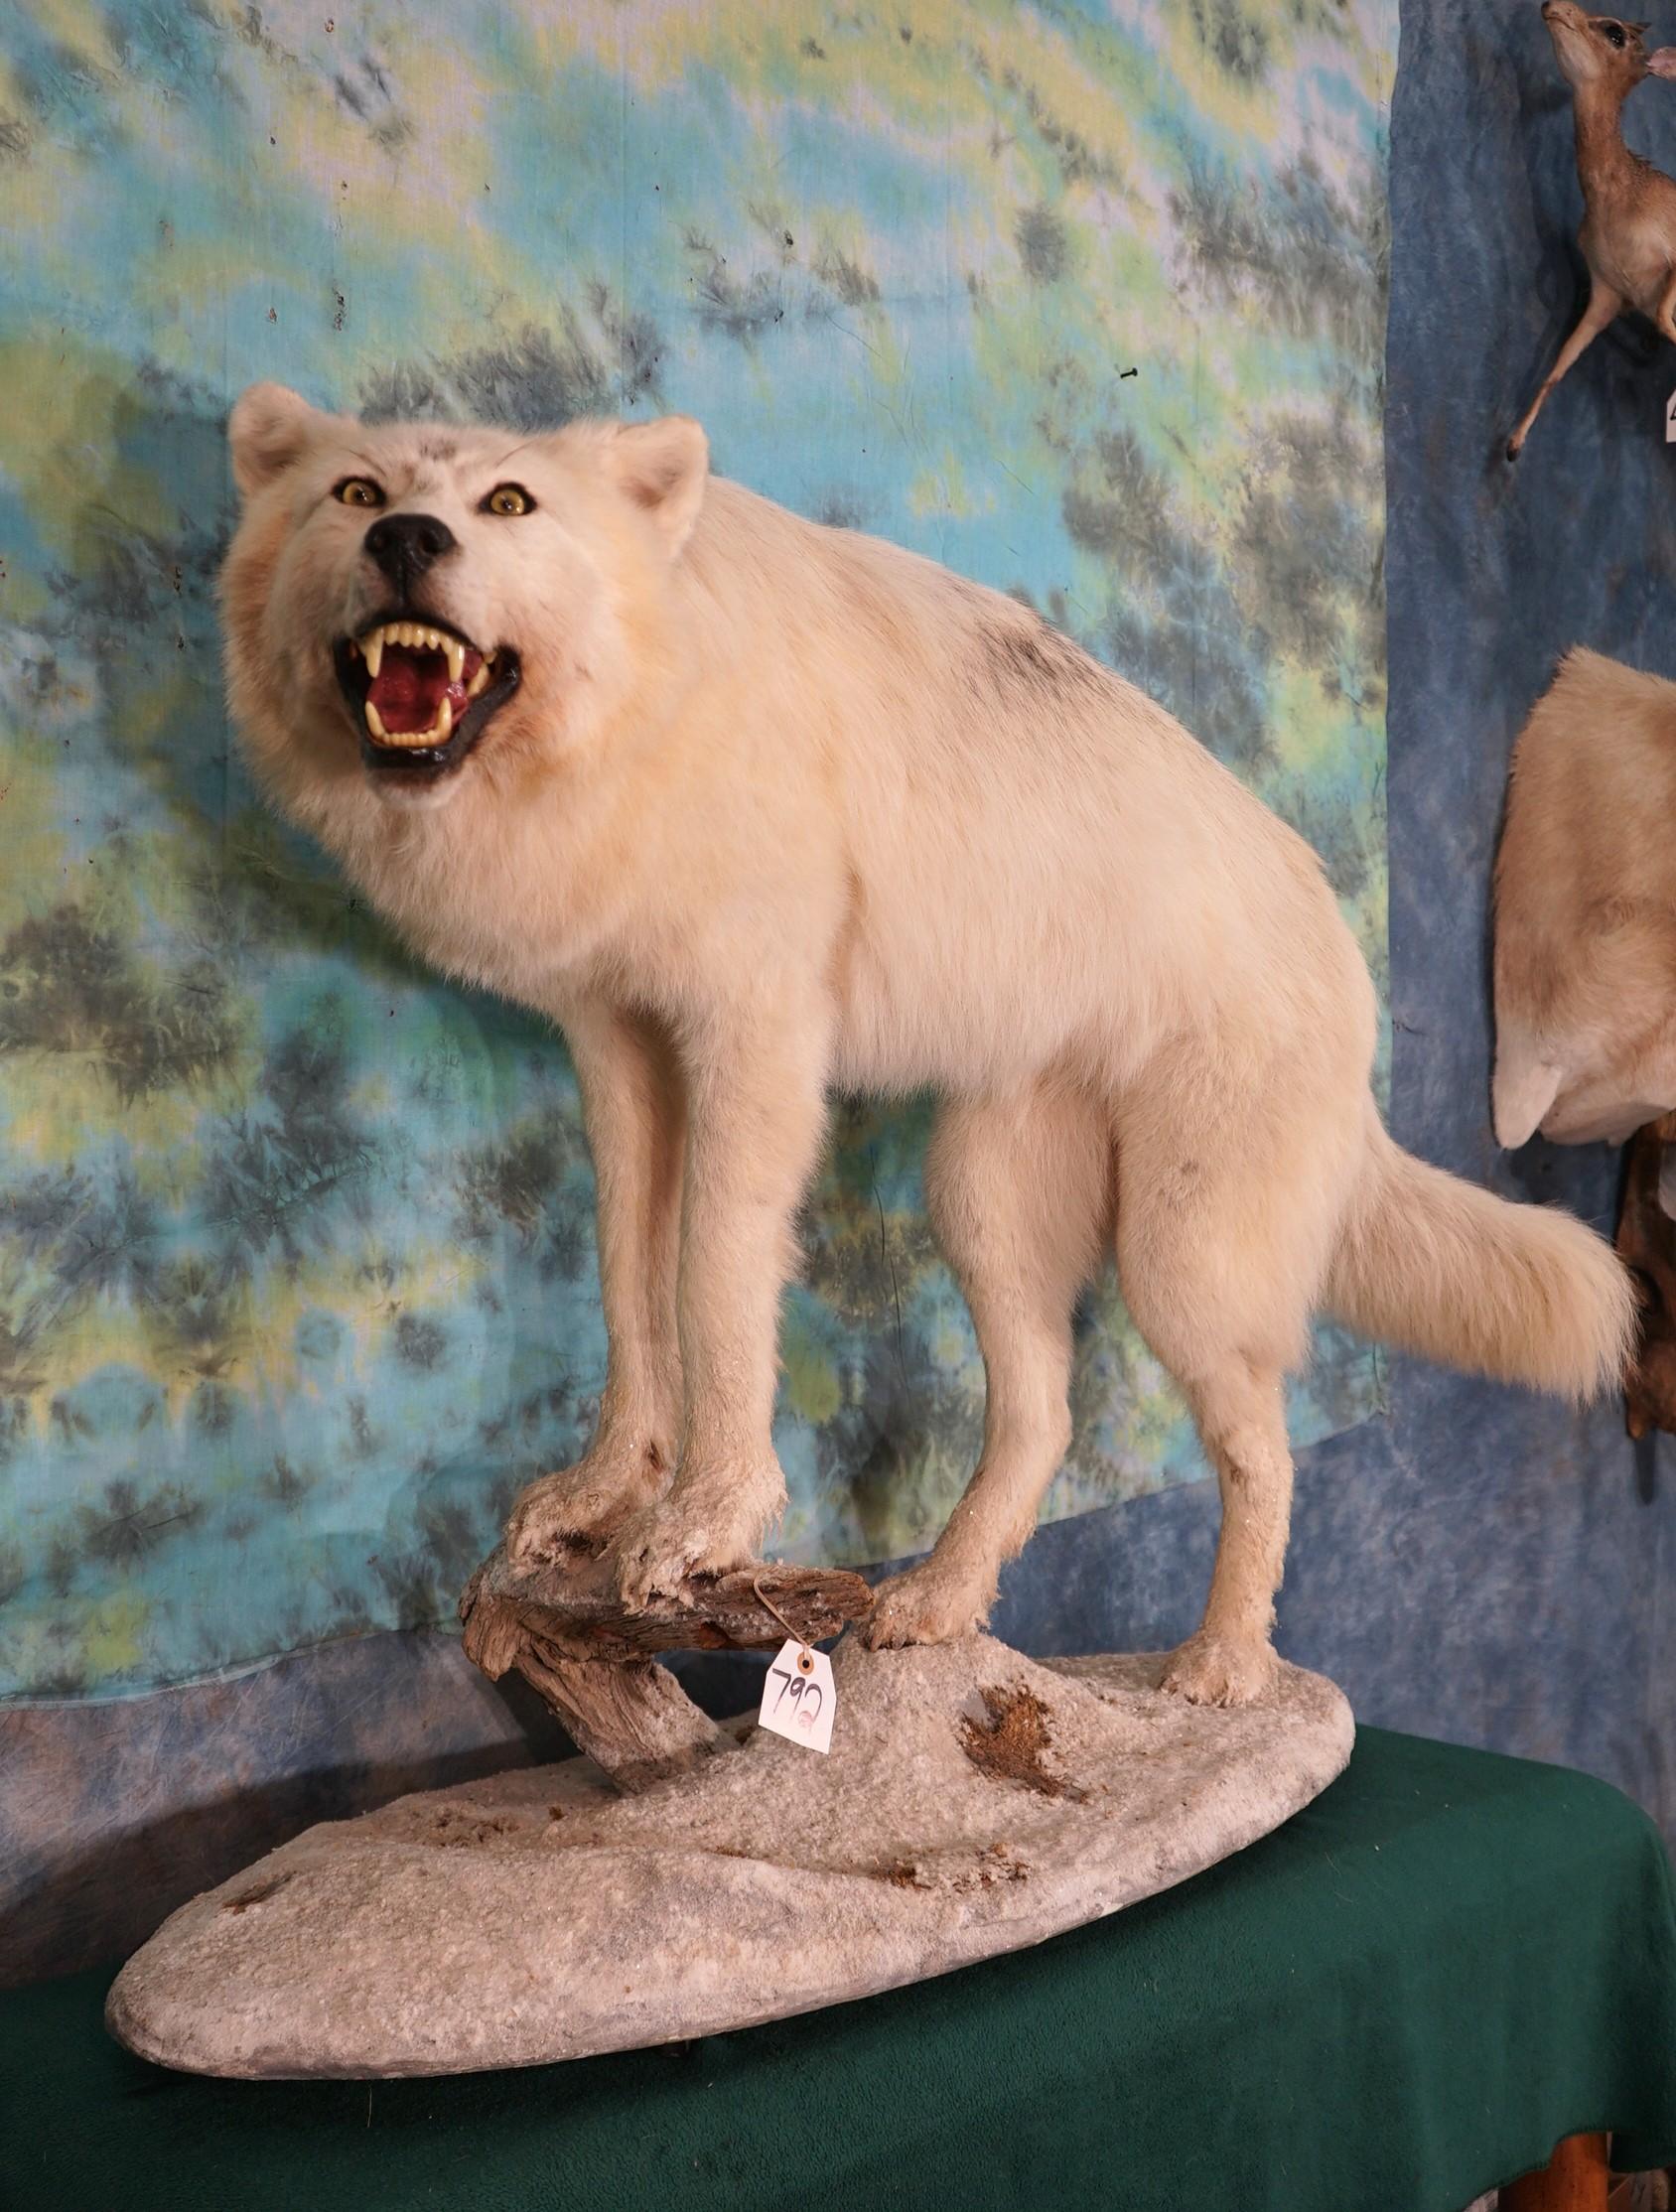 Timber Wolf in Habitat Full Body Taxidermy Mount